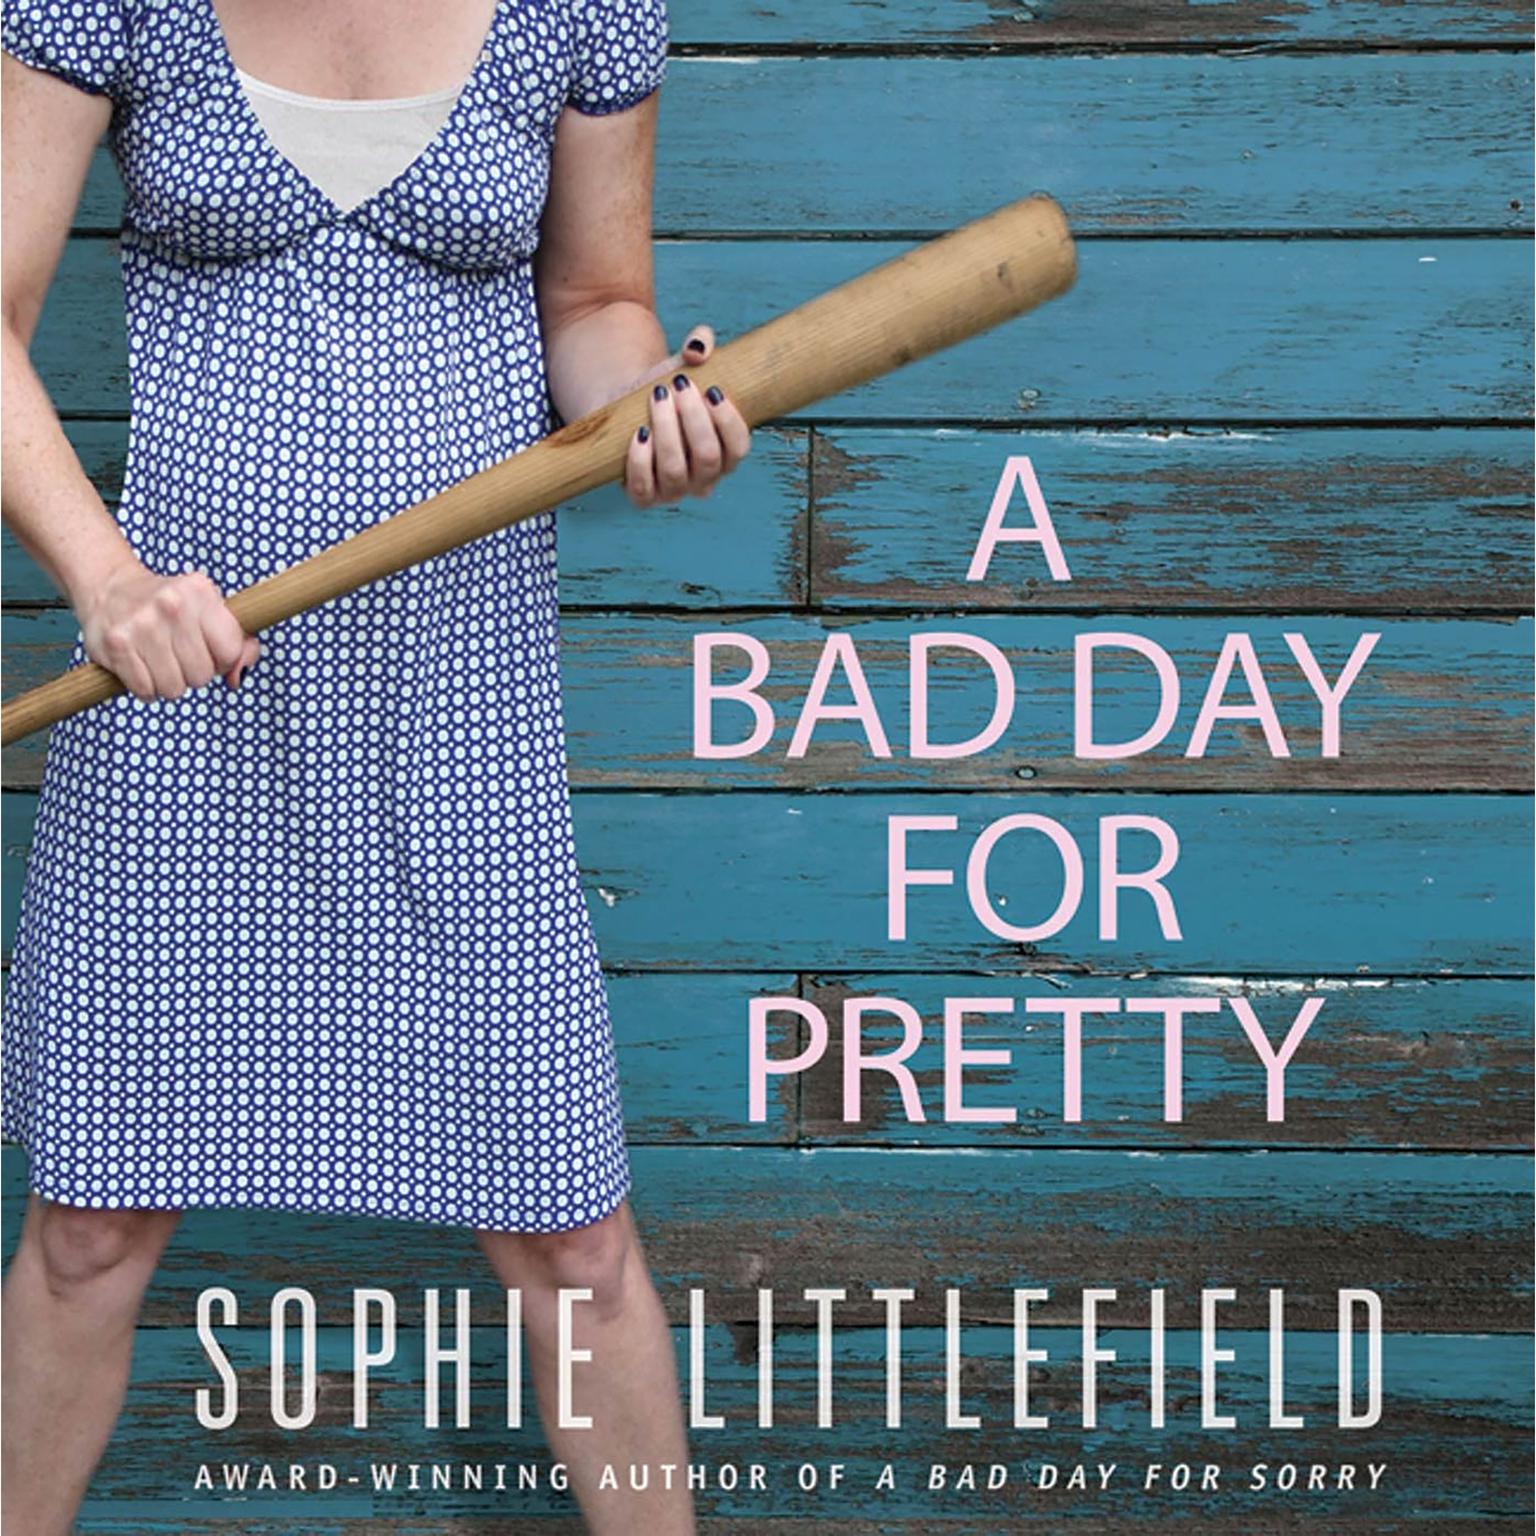 A Bad Day for Pretty: A Crime Novel Audiobook, by Sophie Littlefield